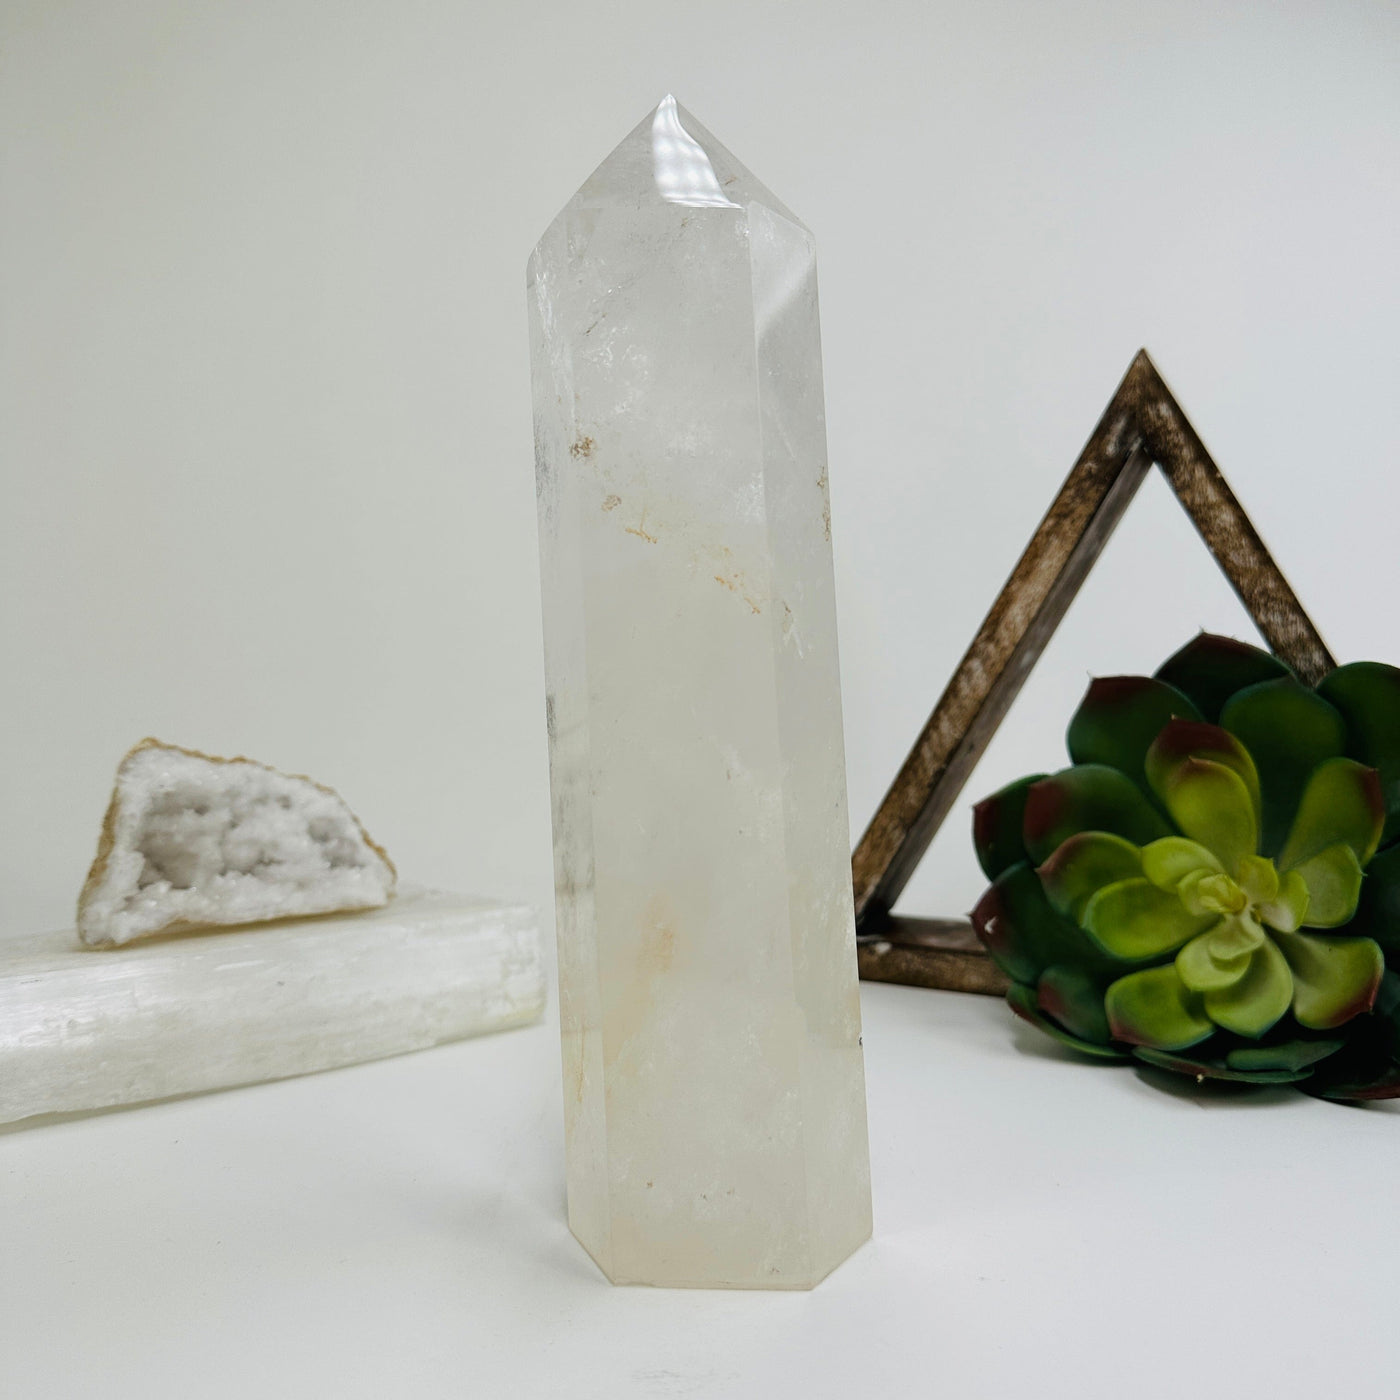 Crystal Quartz tower with decorations in the background